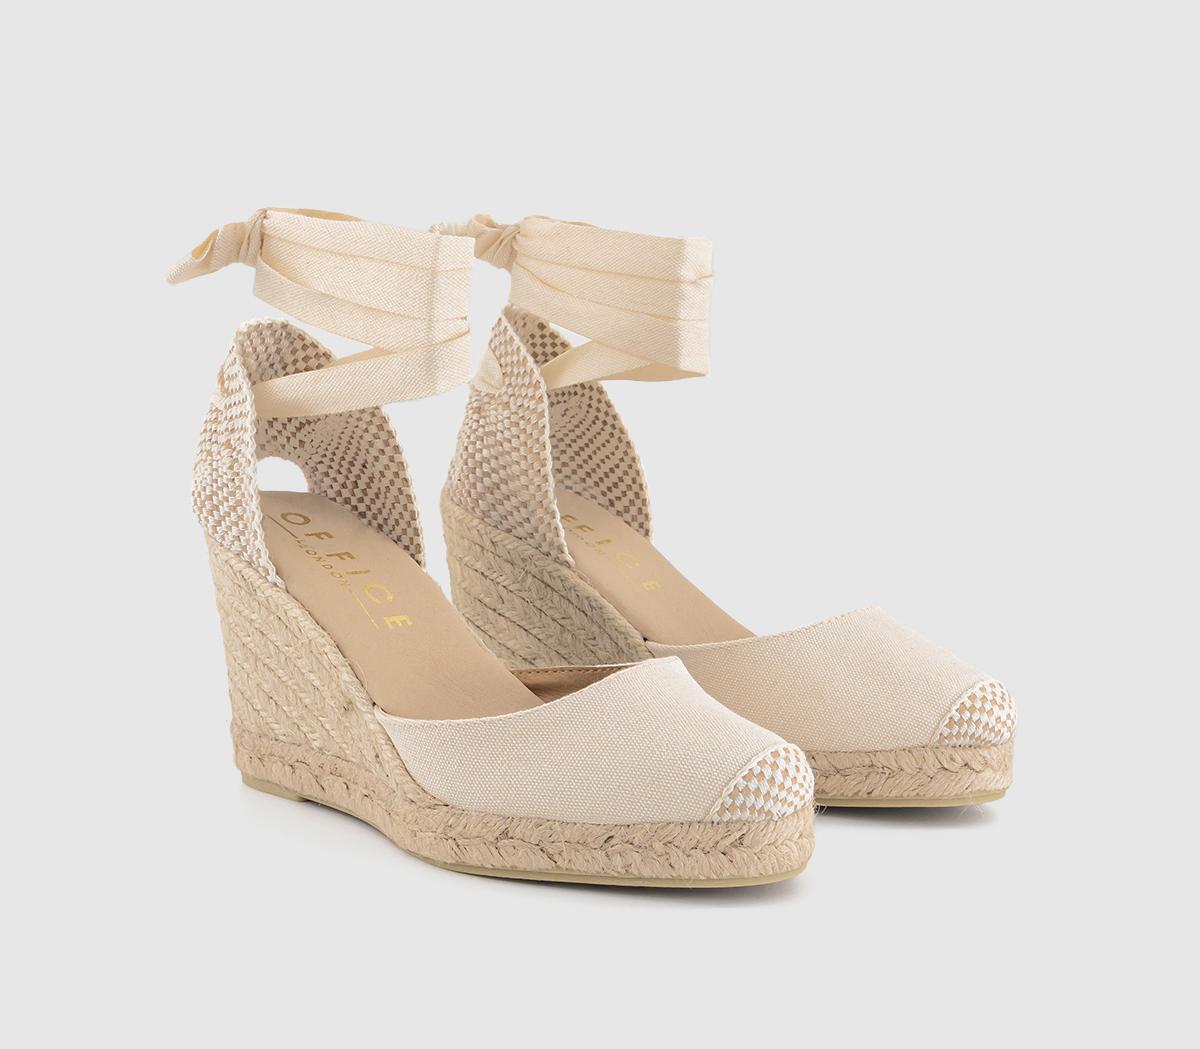 OFFICE Womens Marmalade Ankle Tie Espadrille Wedges Cream Canvas Natural, 6